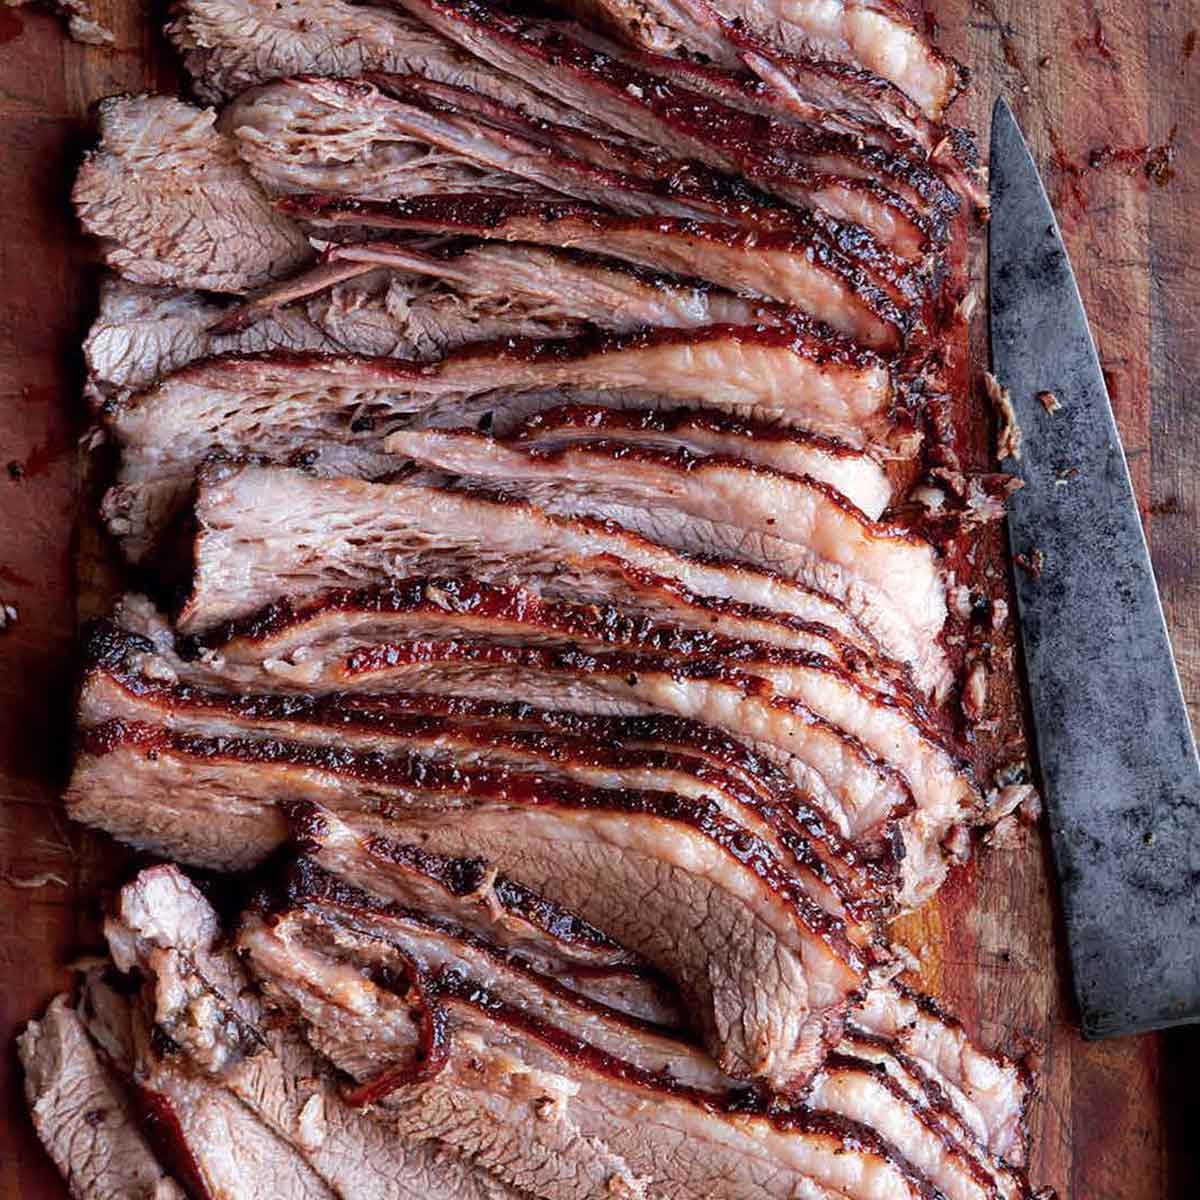 A sliced Texas brisket on a wooden board with a knife lying beside it.